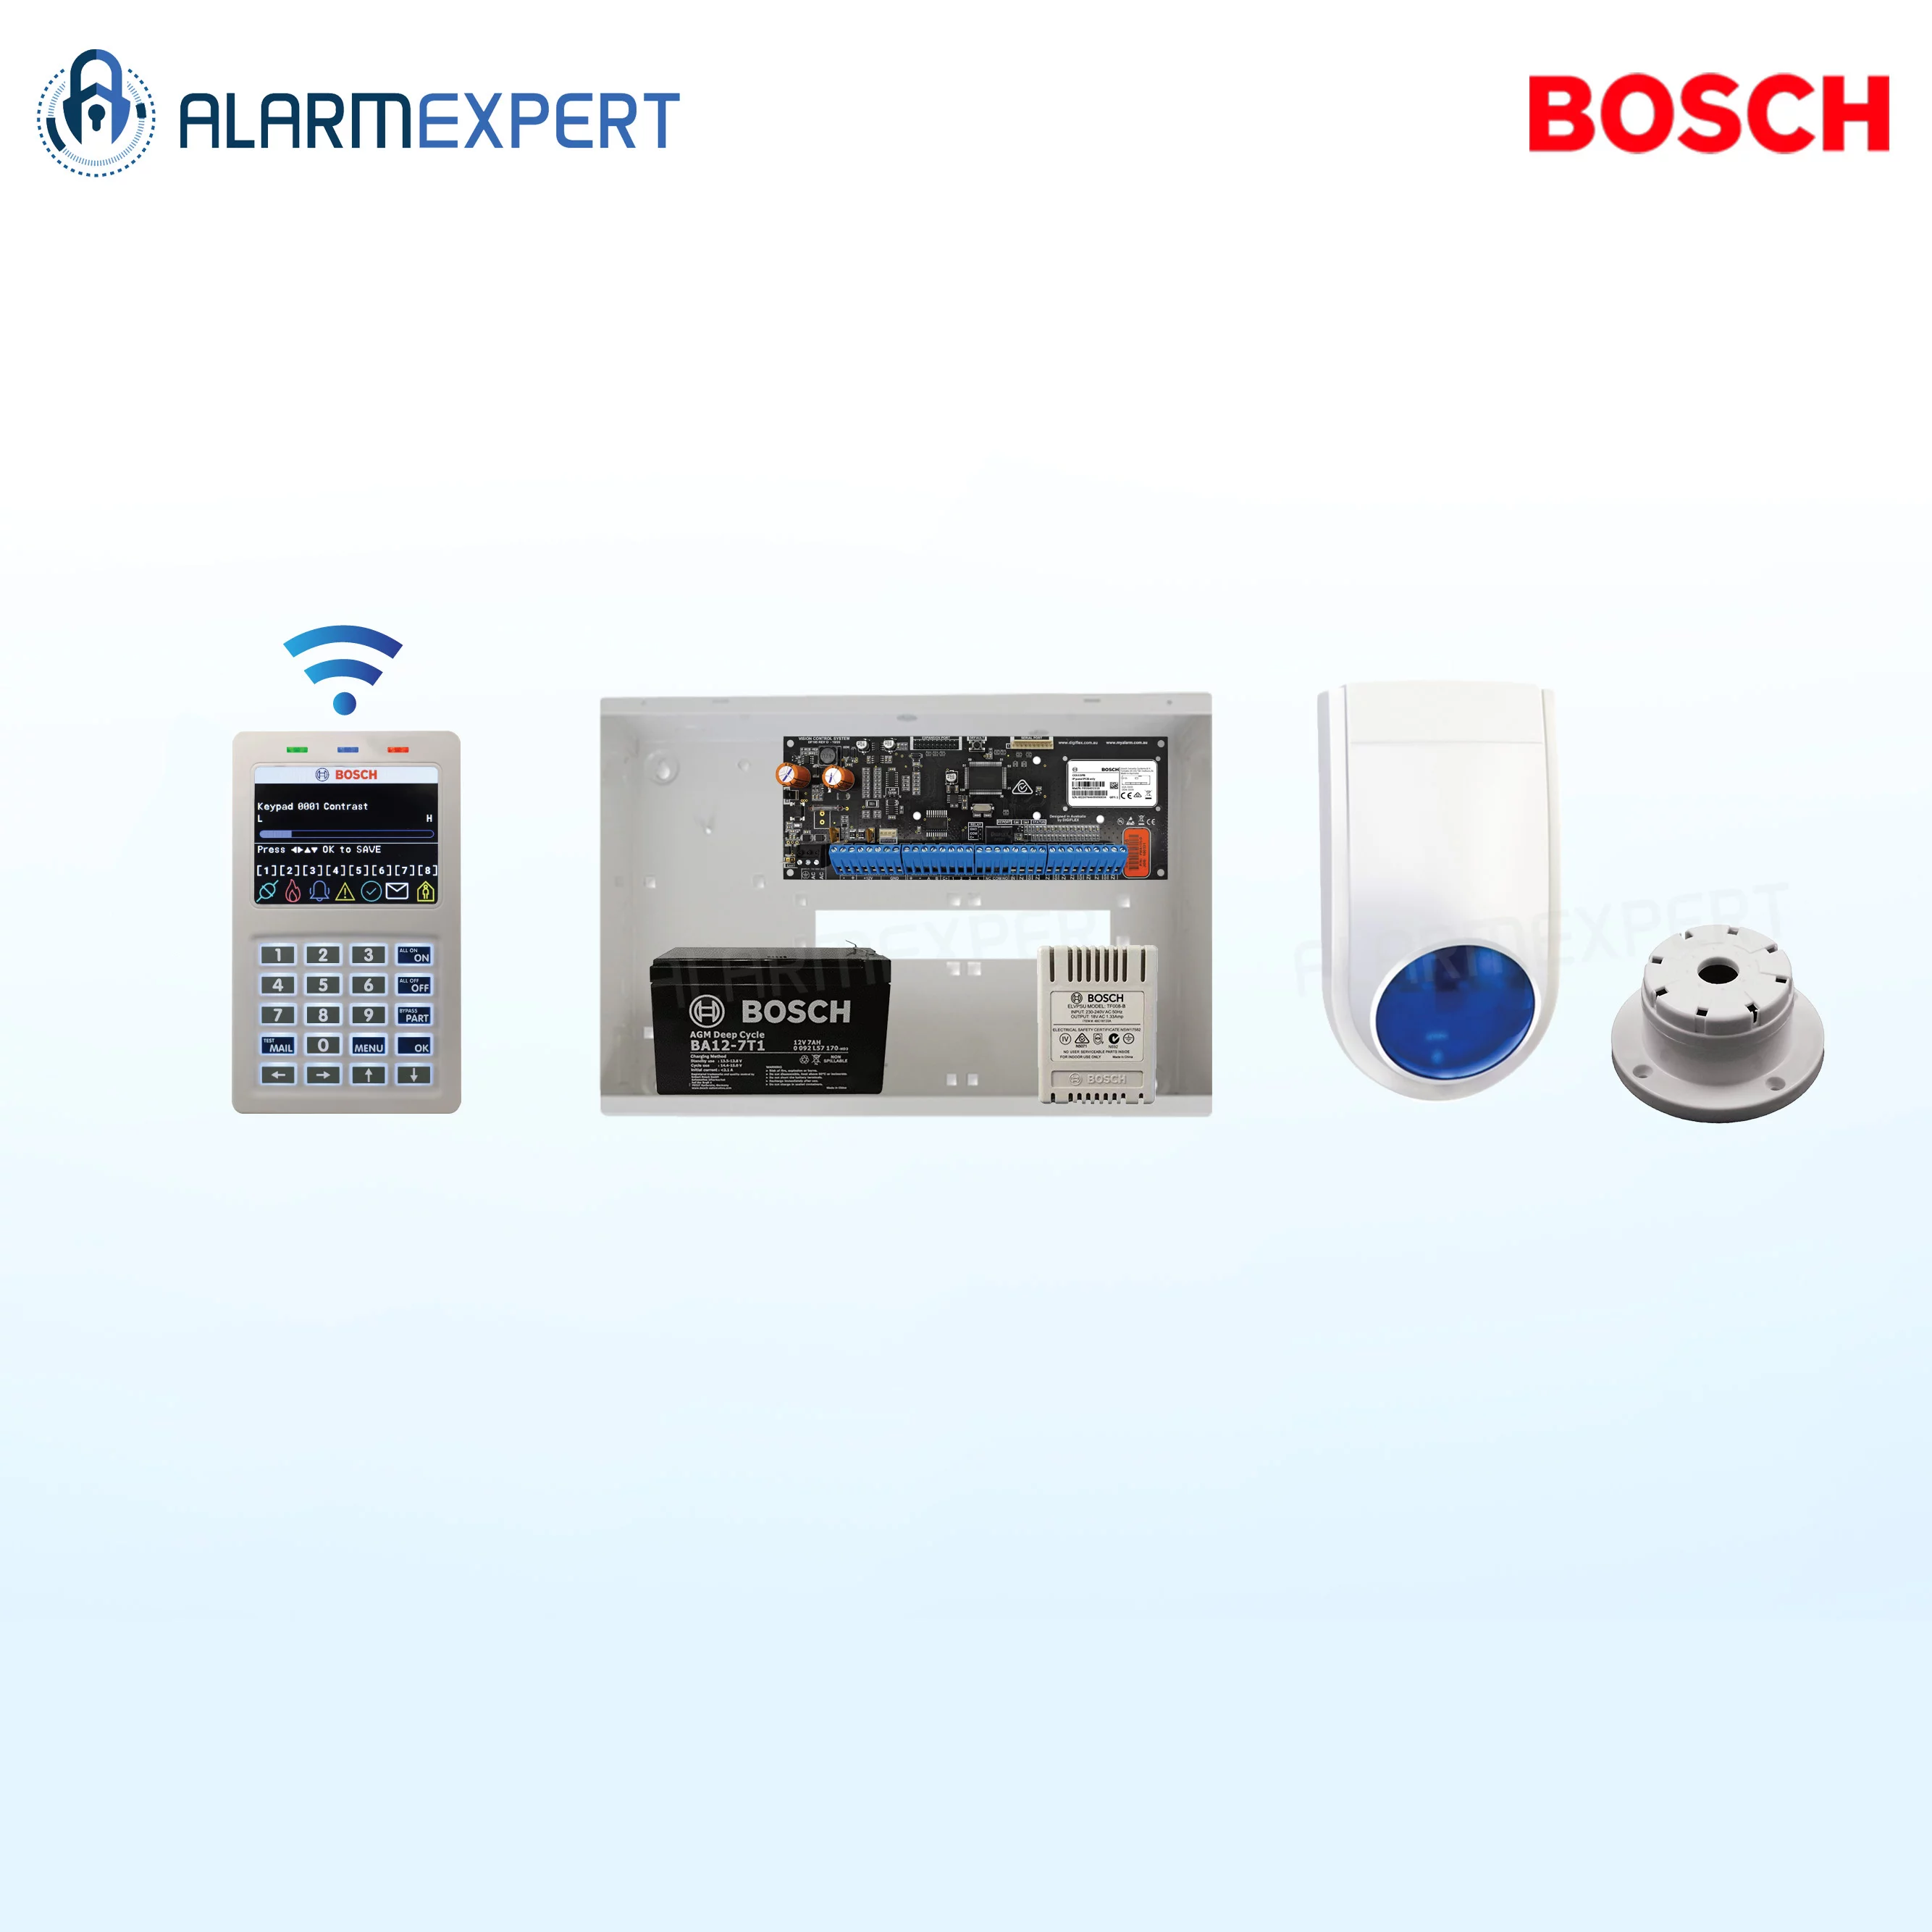 Bosch Solution 6000-WiFi Alarm with NO DETECTOR KIT